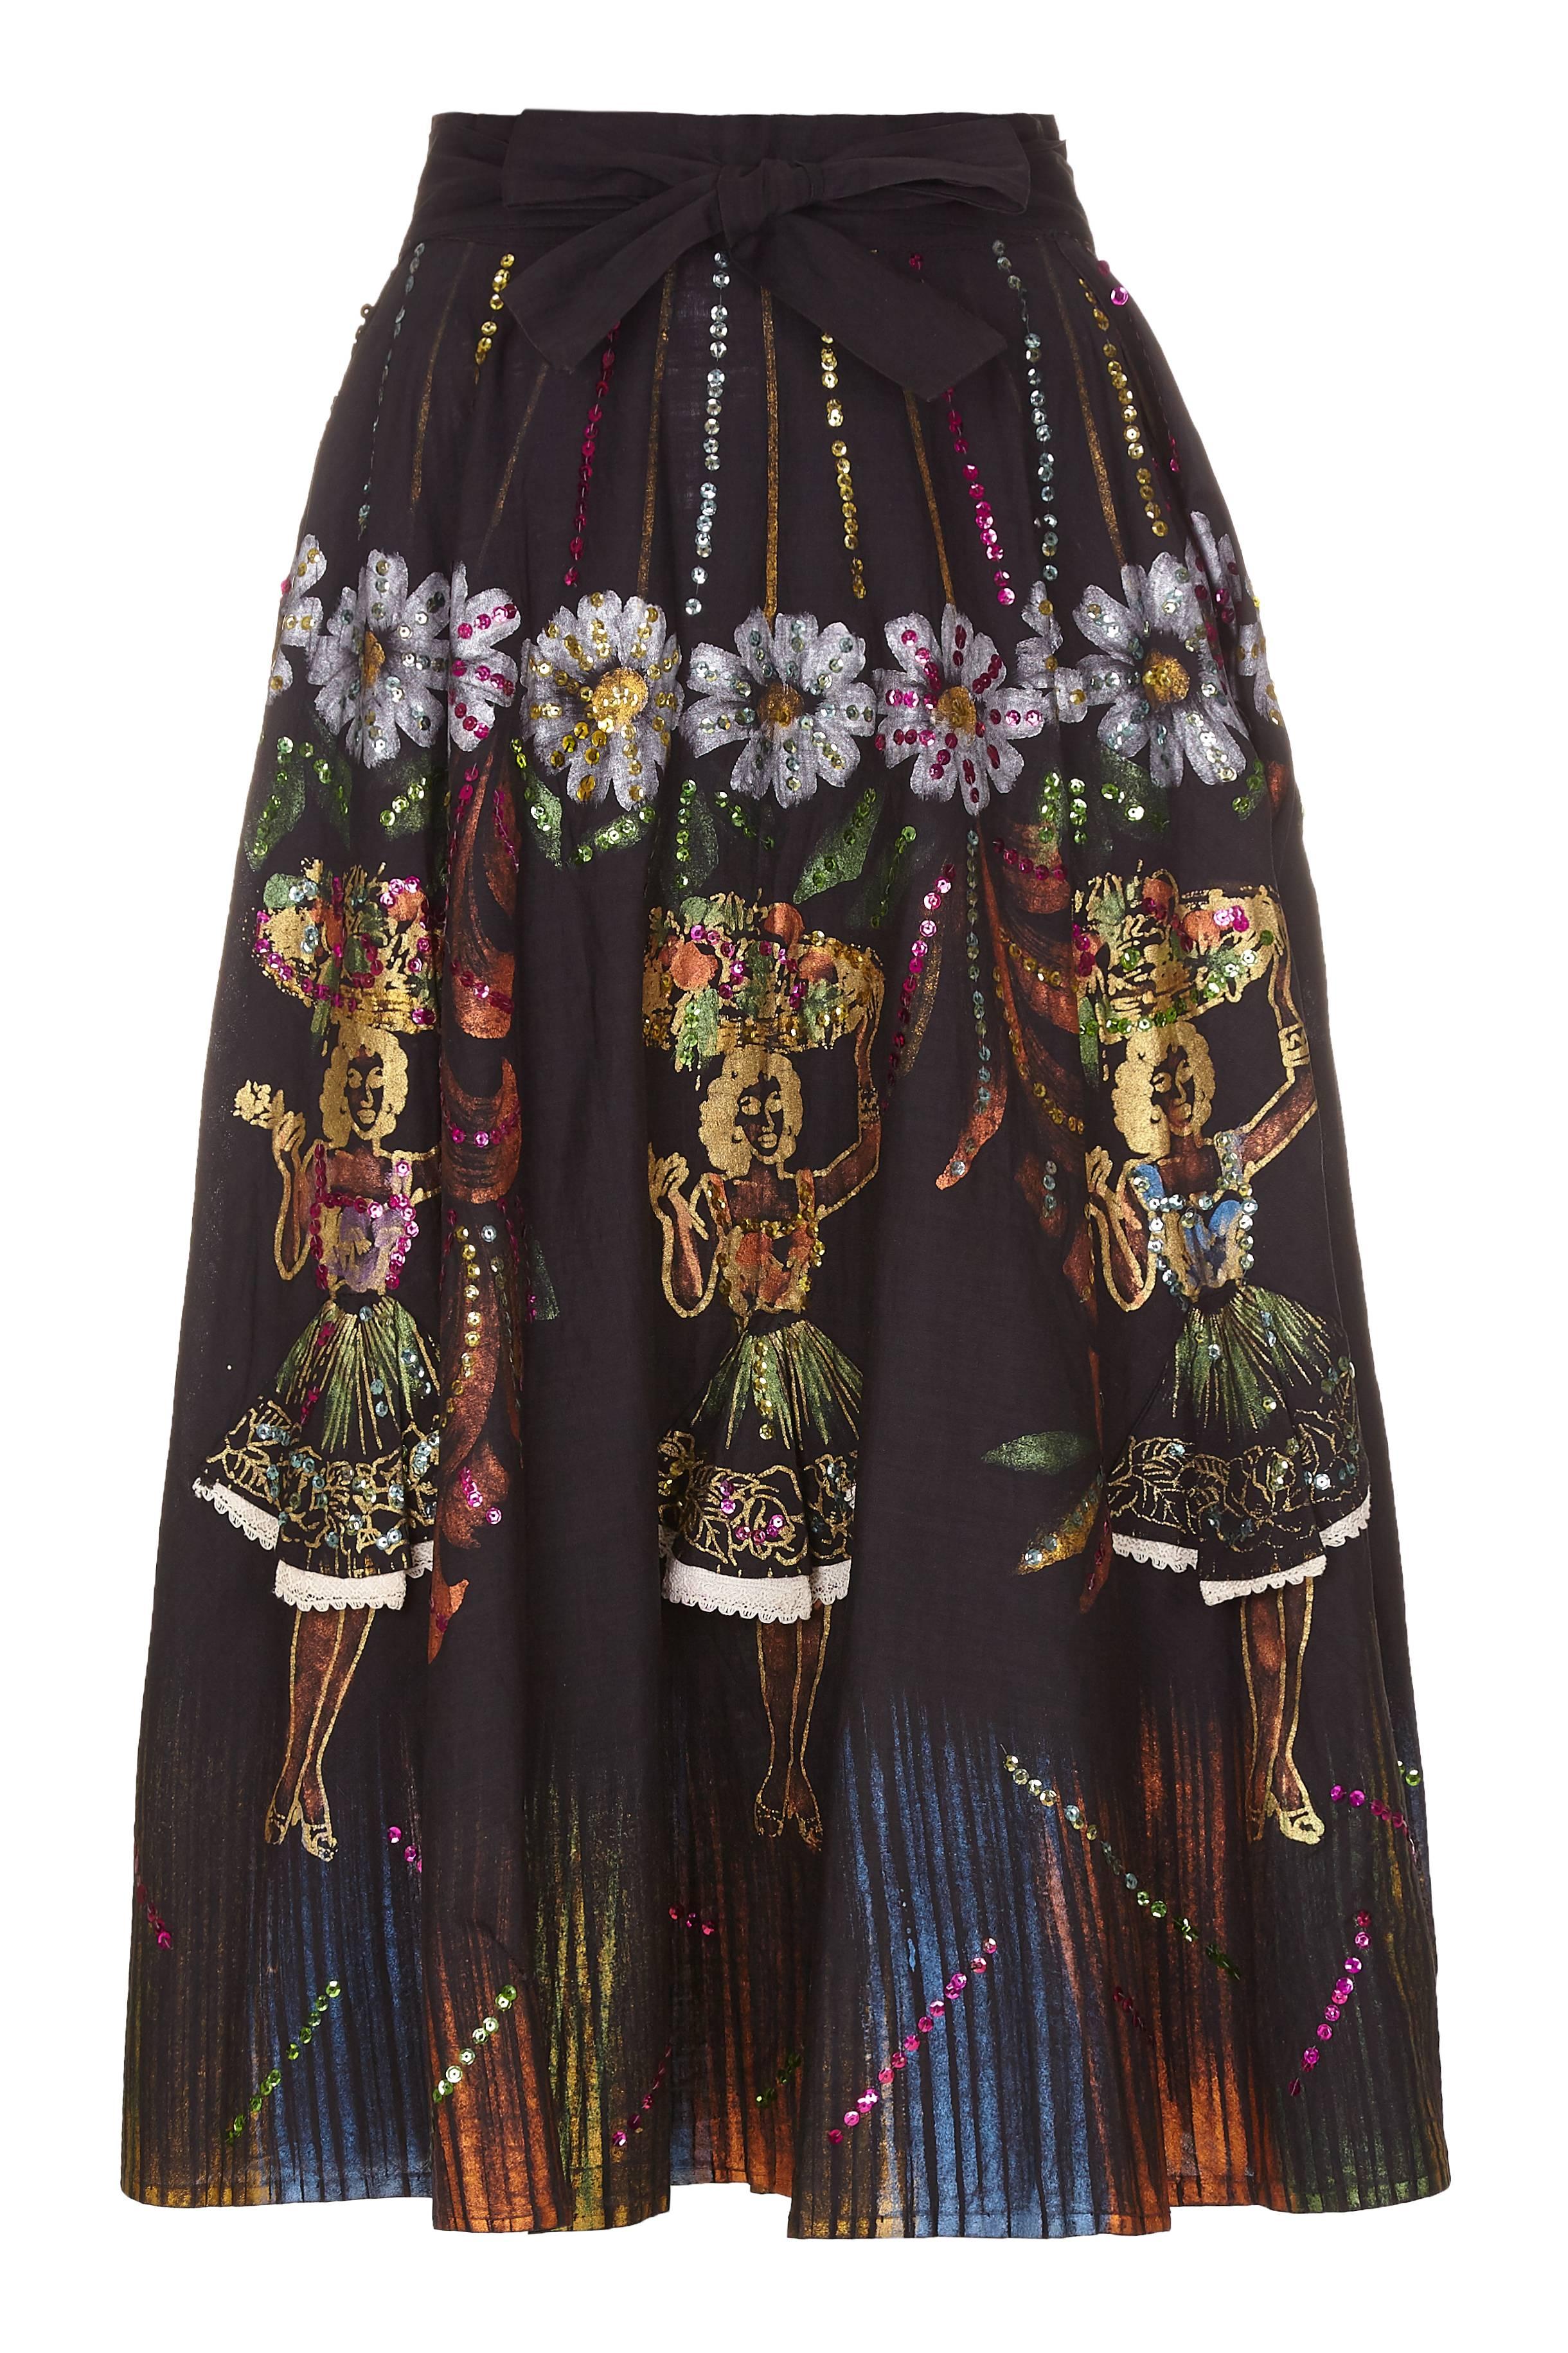 Phenomenal 1950s authentic Mexican full circle skirt with fabulous hand painted Carmen Miranda inspired dancing girls with flowers and fruit in multicoloured metallics and sequins.  Every girl has their own a 3D Mexican skirt which lifts up to